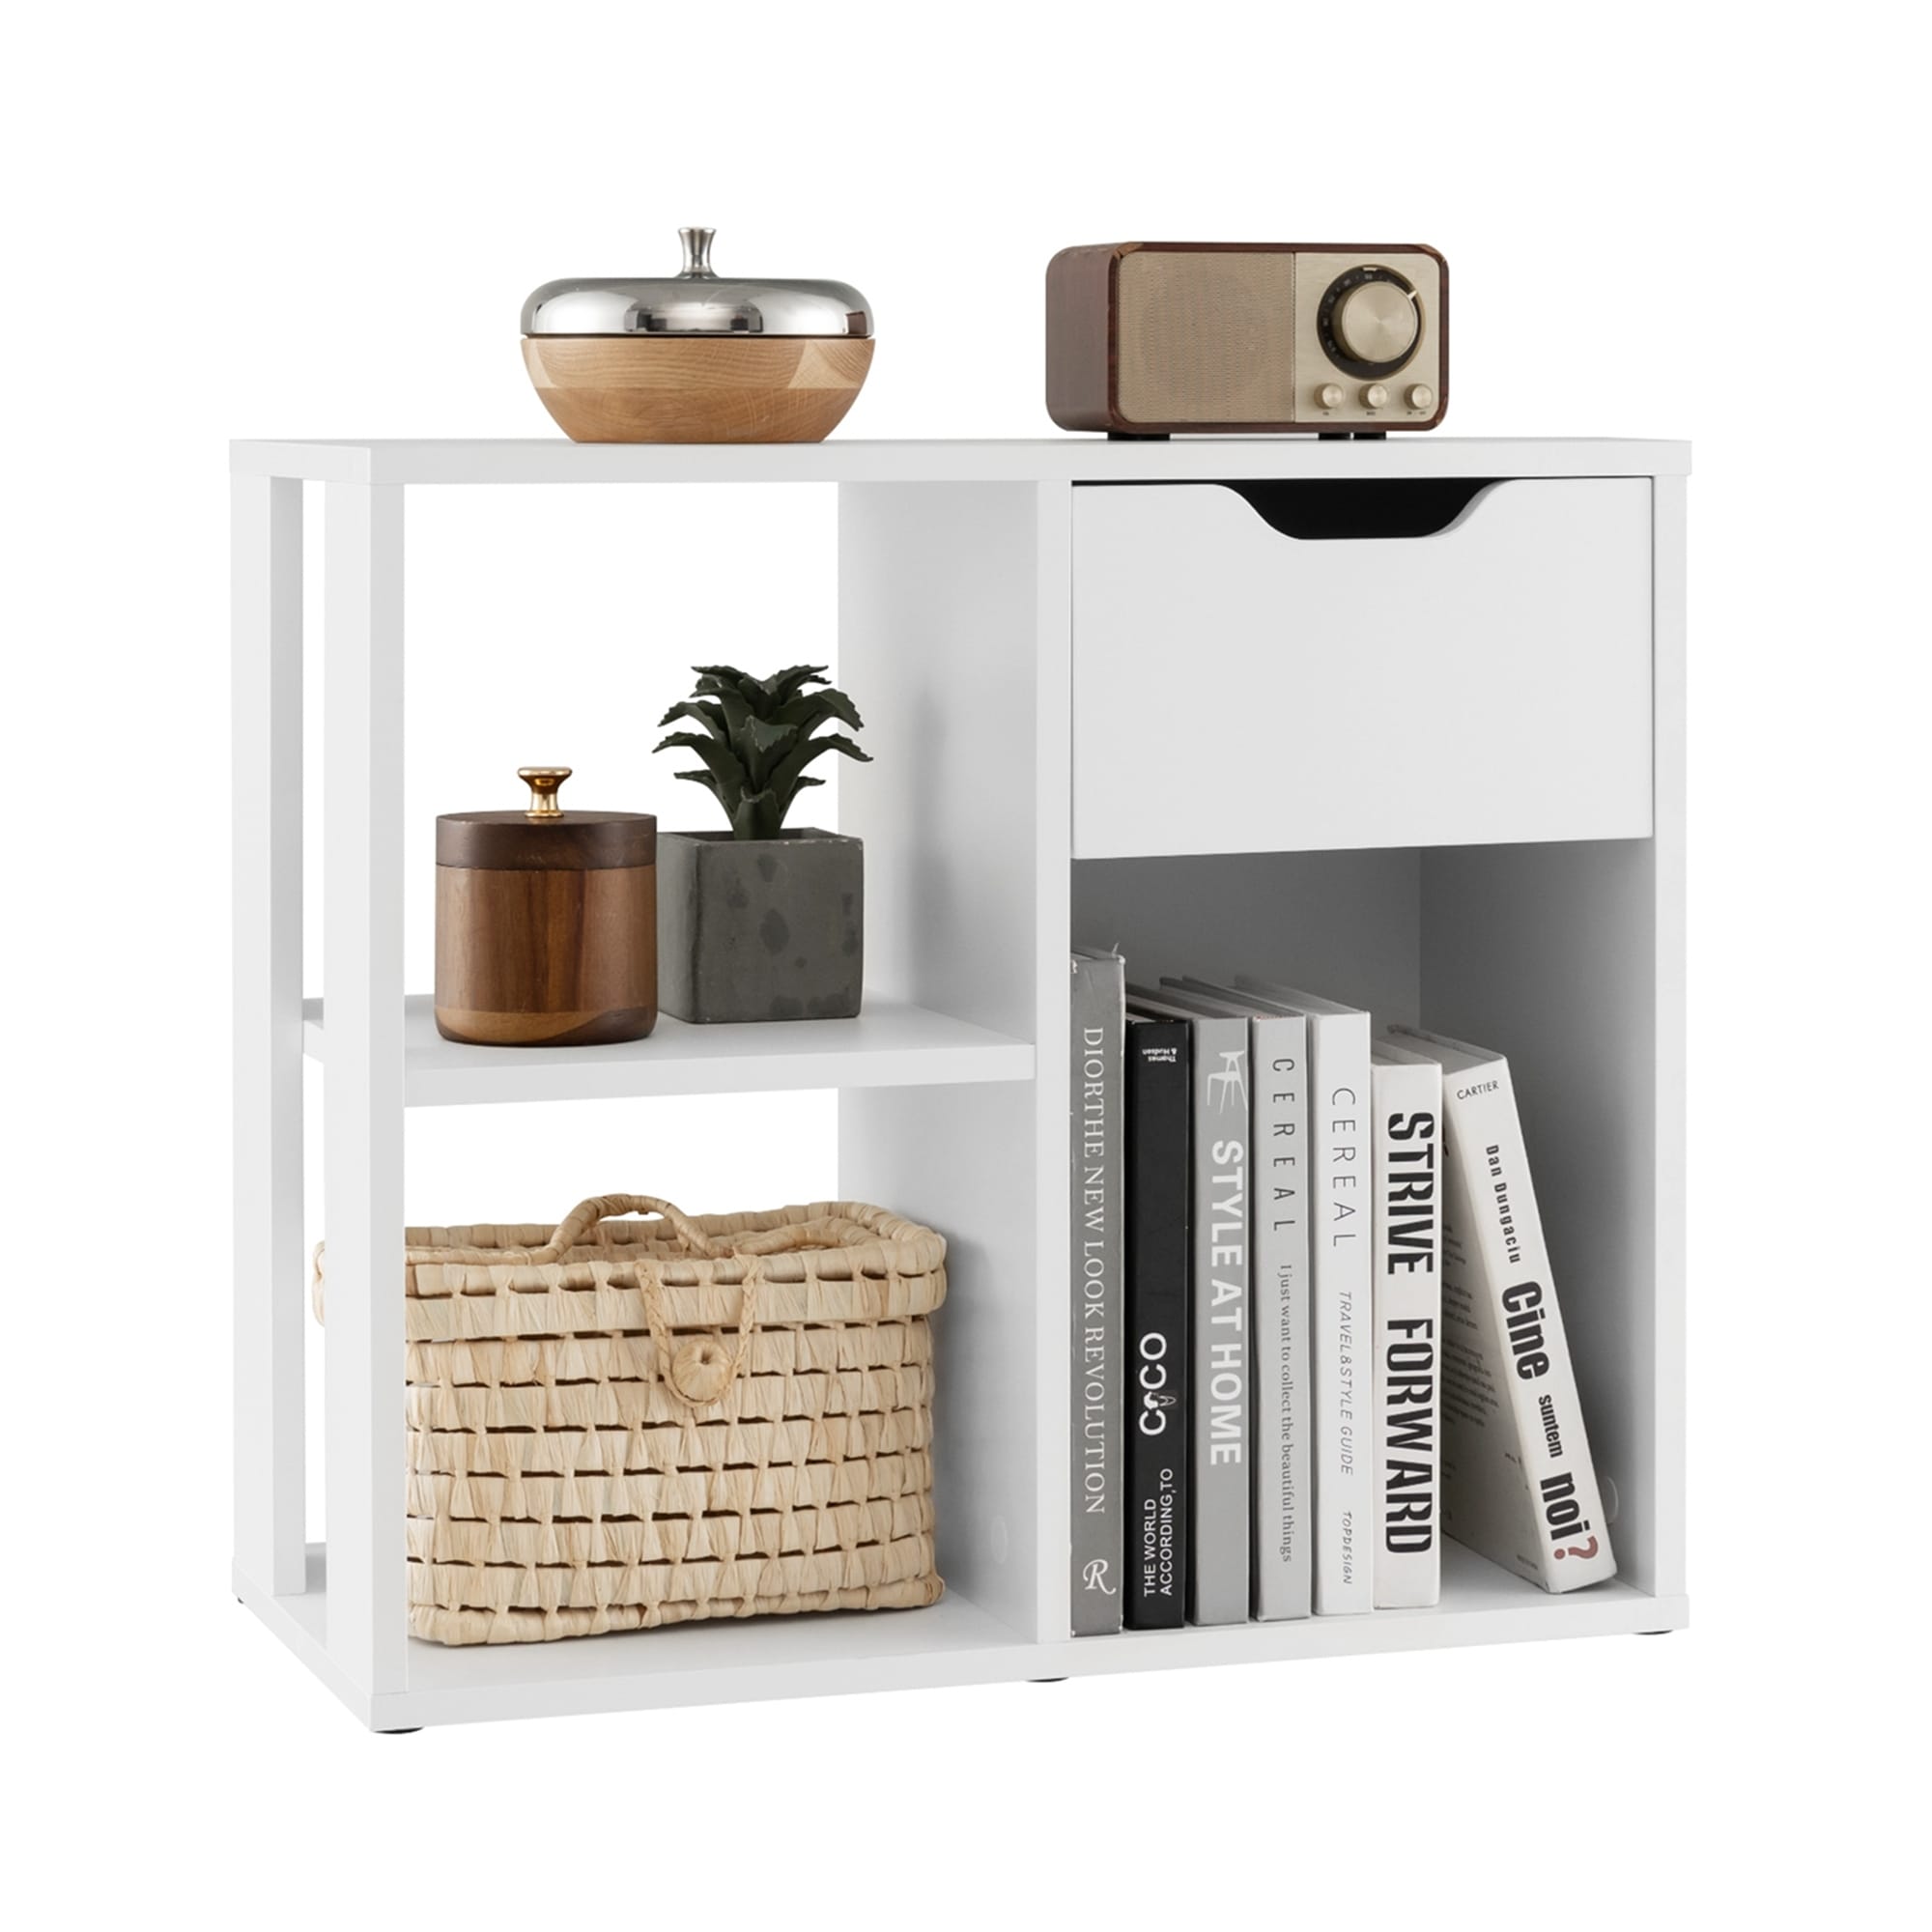 https://ak1.ostkcdn.com/images/products/is/images/direct/b9e1f00fd97140aa15fcda2ba0500d1ac5f5ac9a/Costway-3-Cube-Bookcase-Organizer-with-2-tier-Wooden-Storage-Shelf-%26.jpg